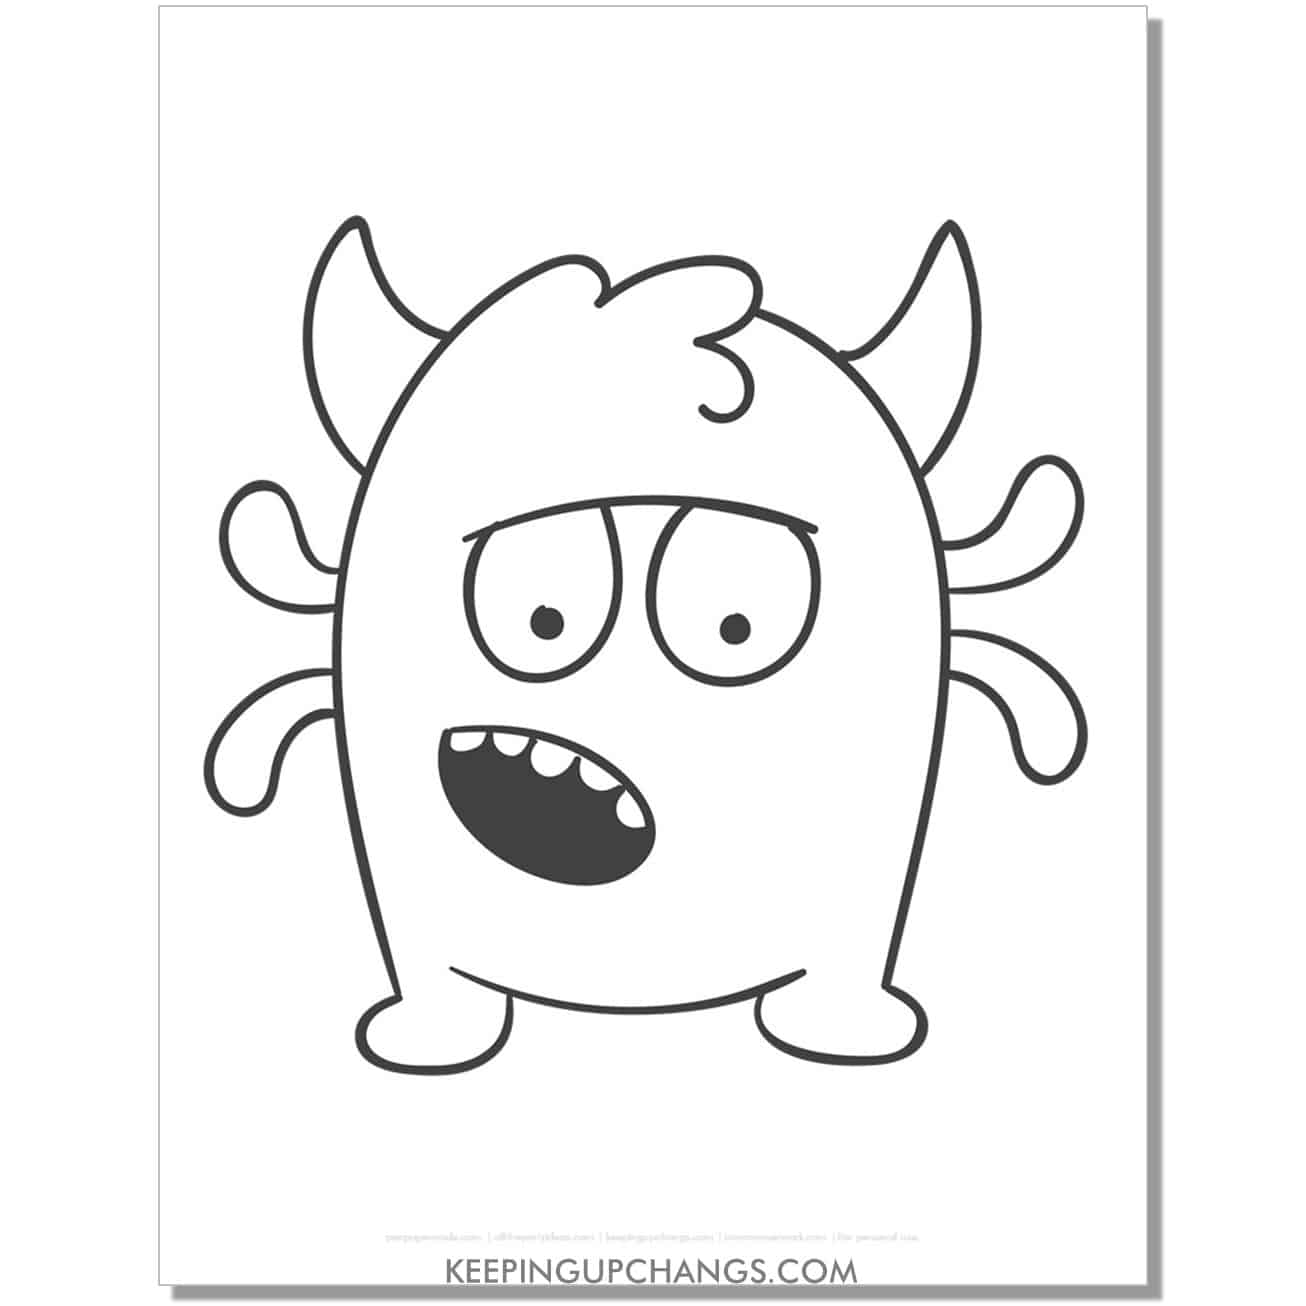 free 4 armed monster coloring page.